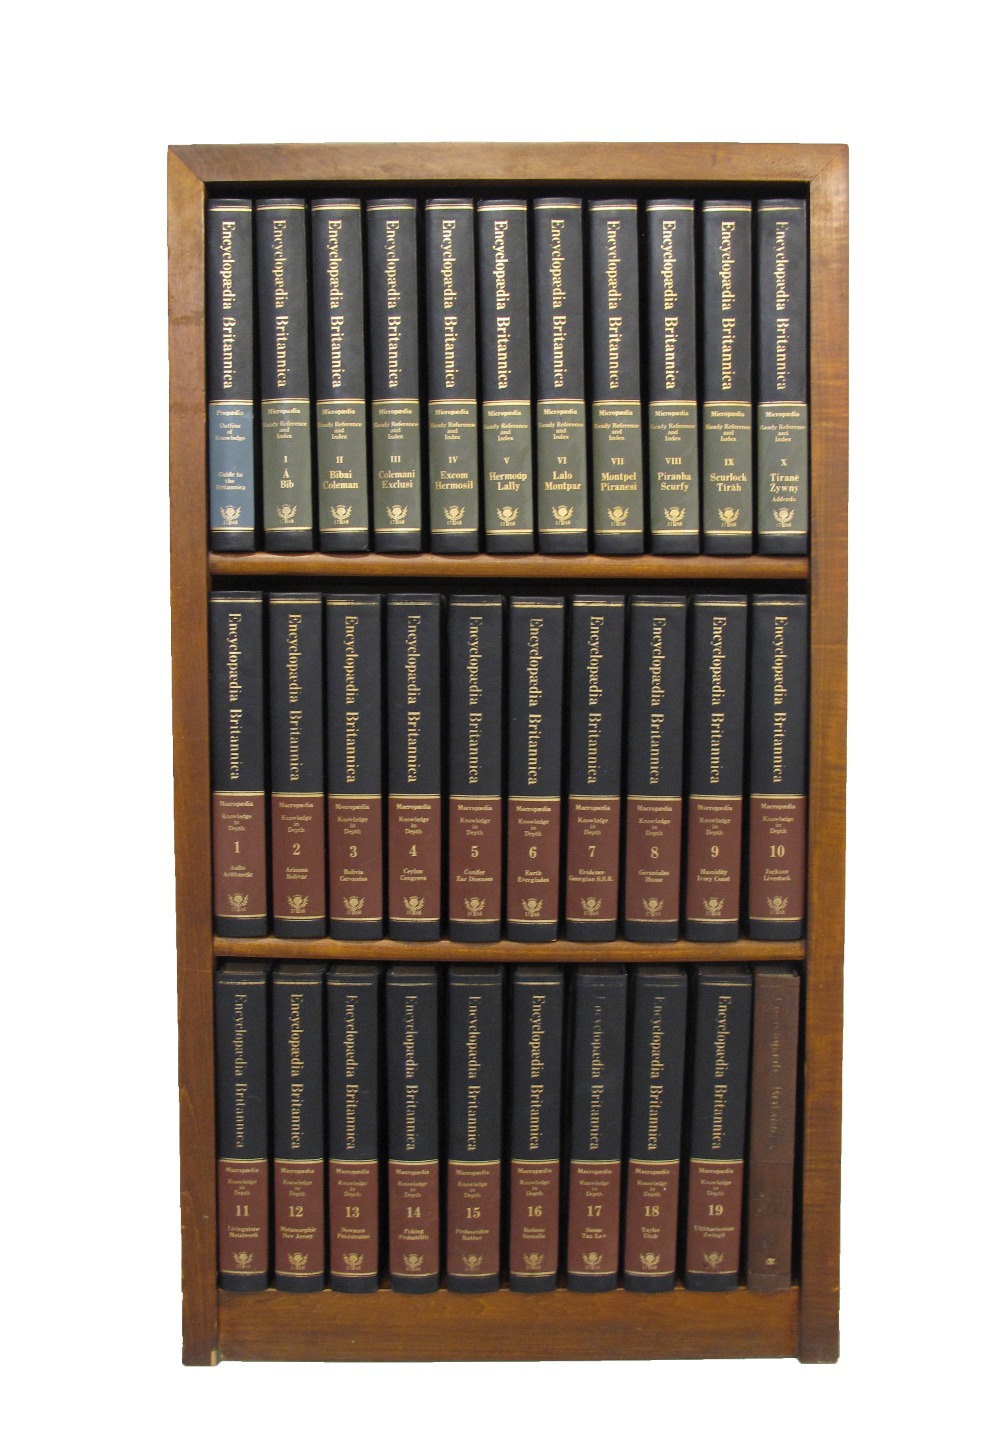 A three shelf bookcase containing 31 volumes of Encyclopaedia Britannica, 15th Edition, leather - Image 3 of 6